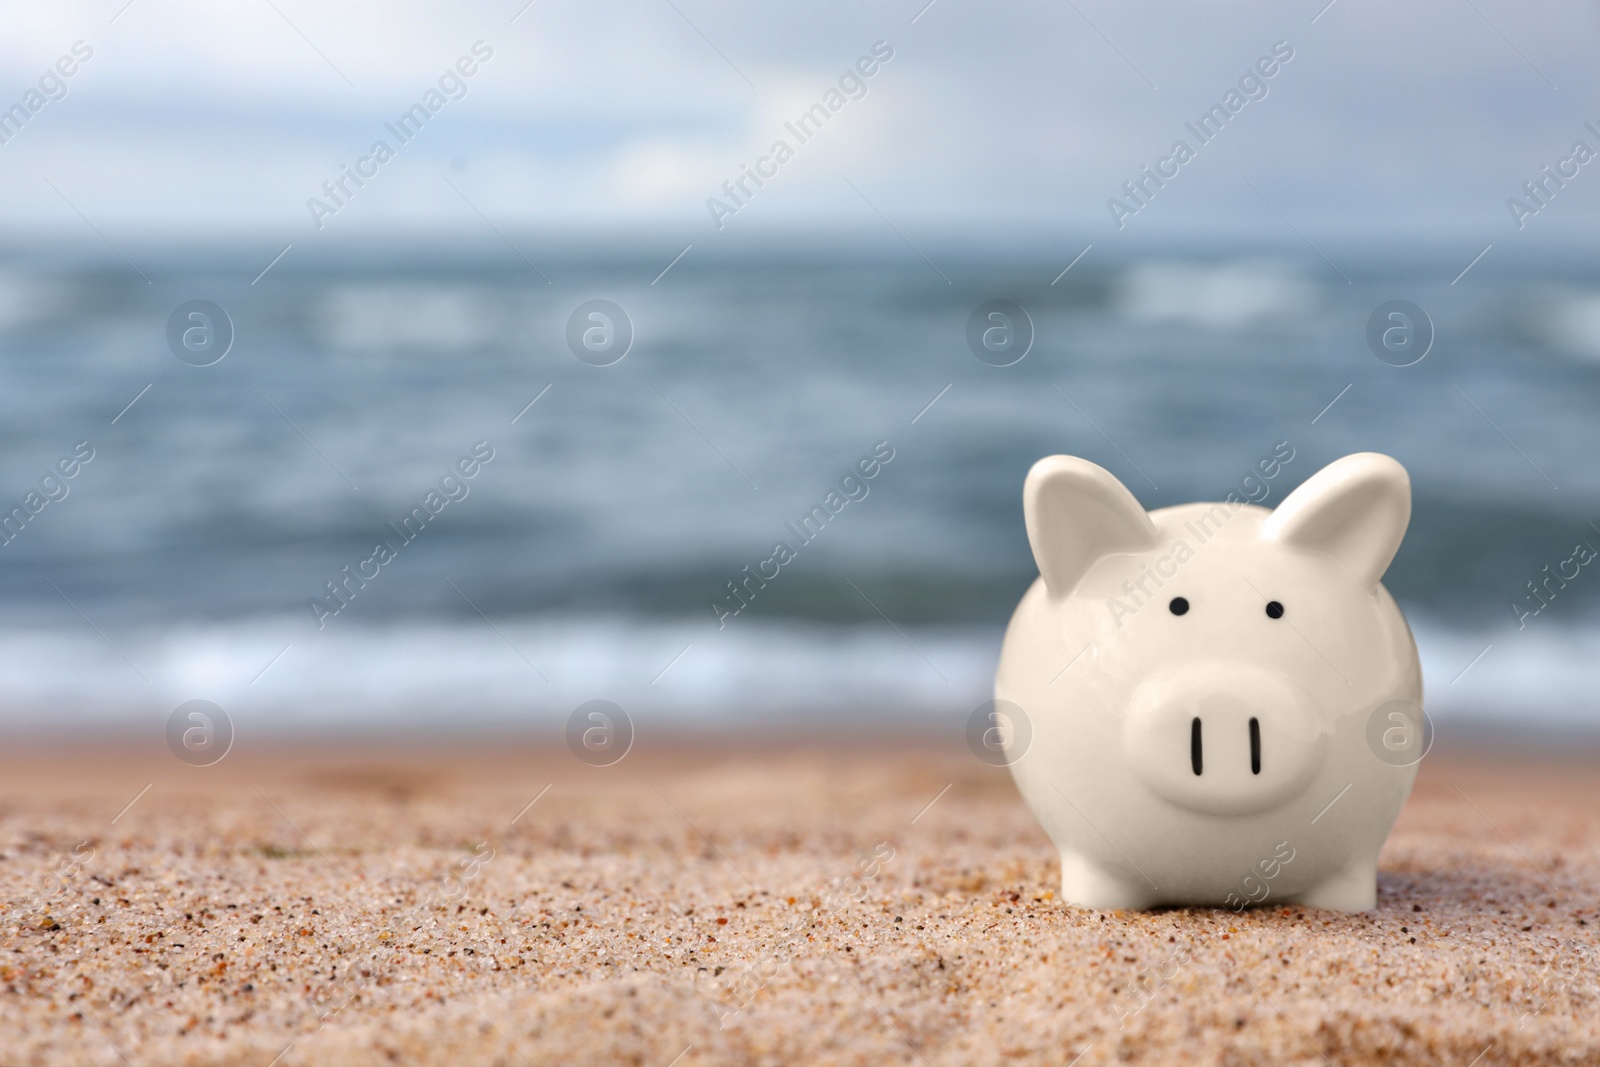 Photo of Cute piggy bank on sand near sea, space for text